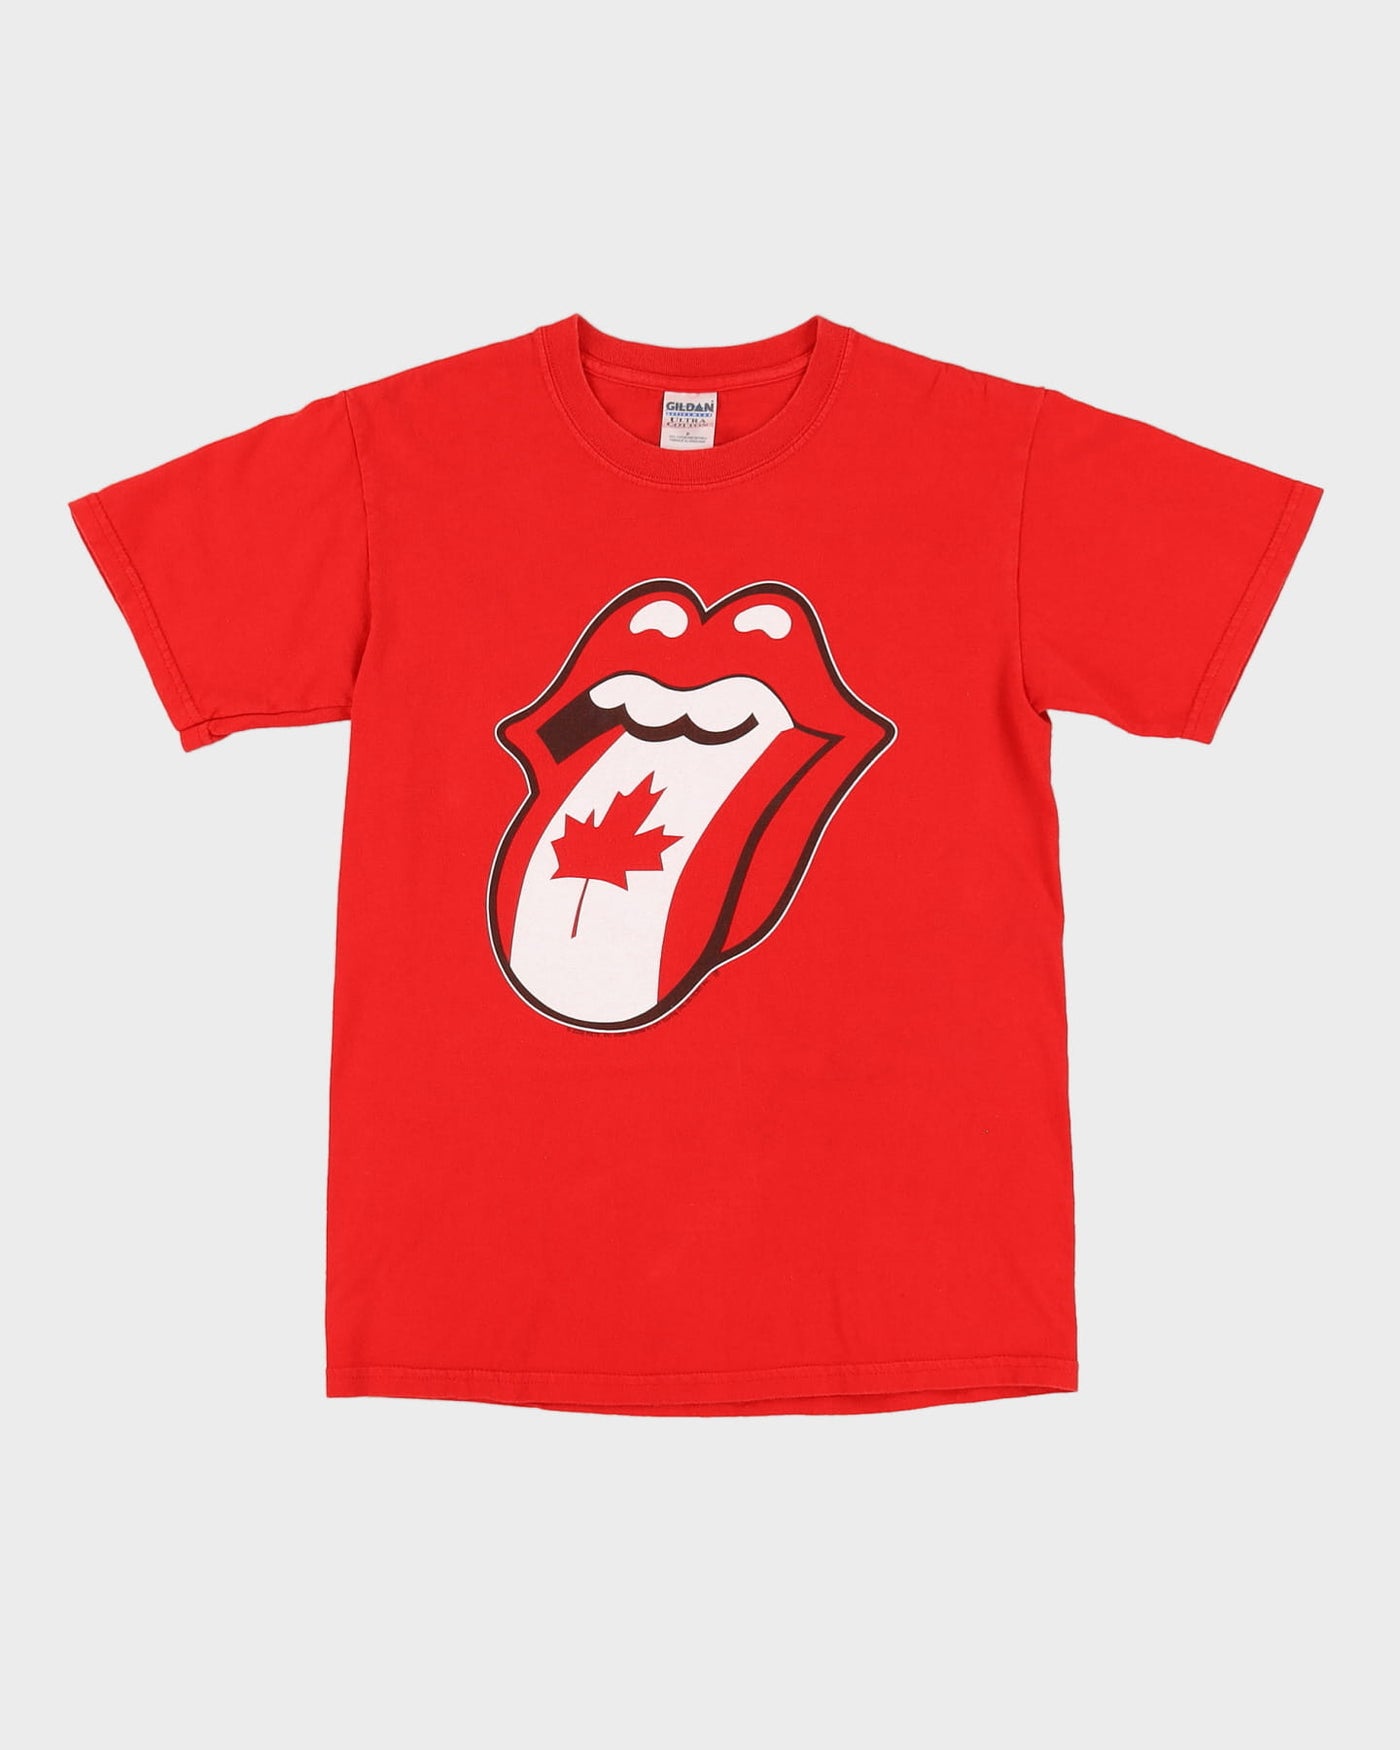 2006 The Rolling Stones Canada Tour Red Band T-Shirt - S